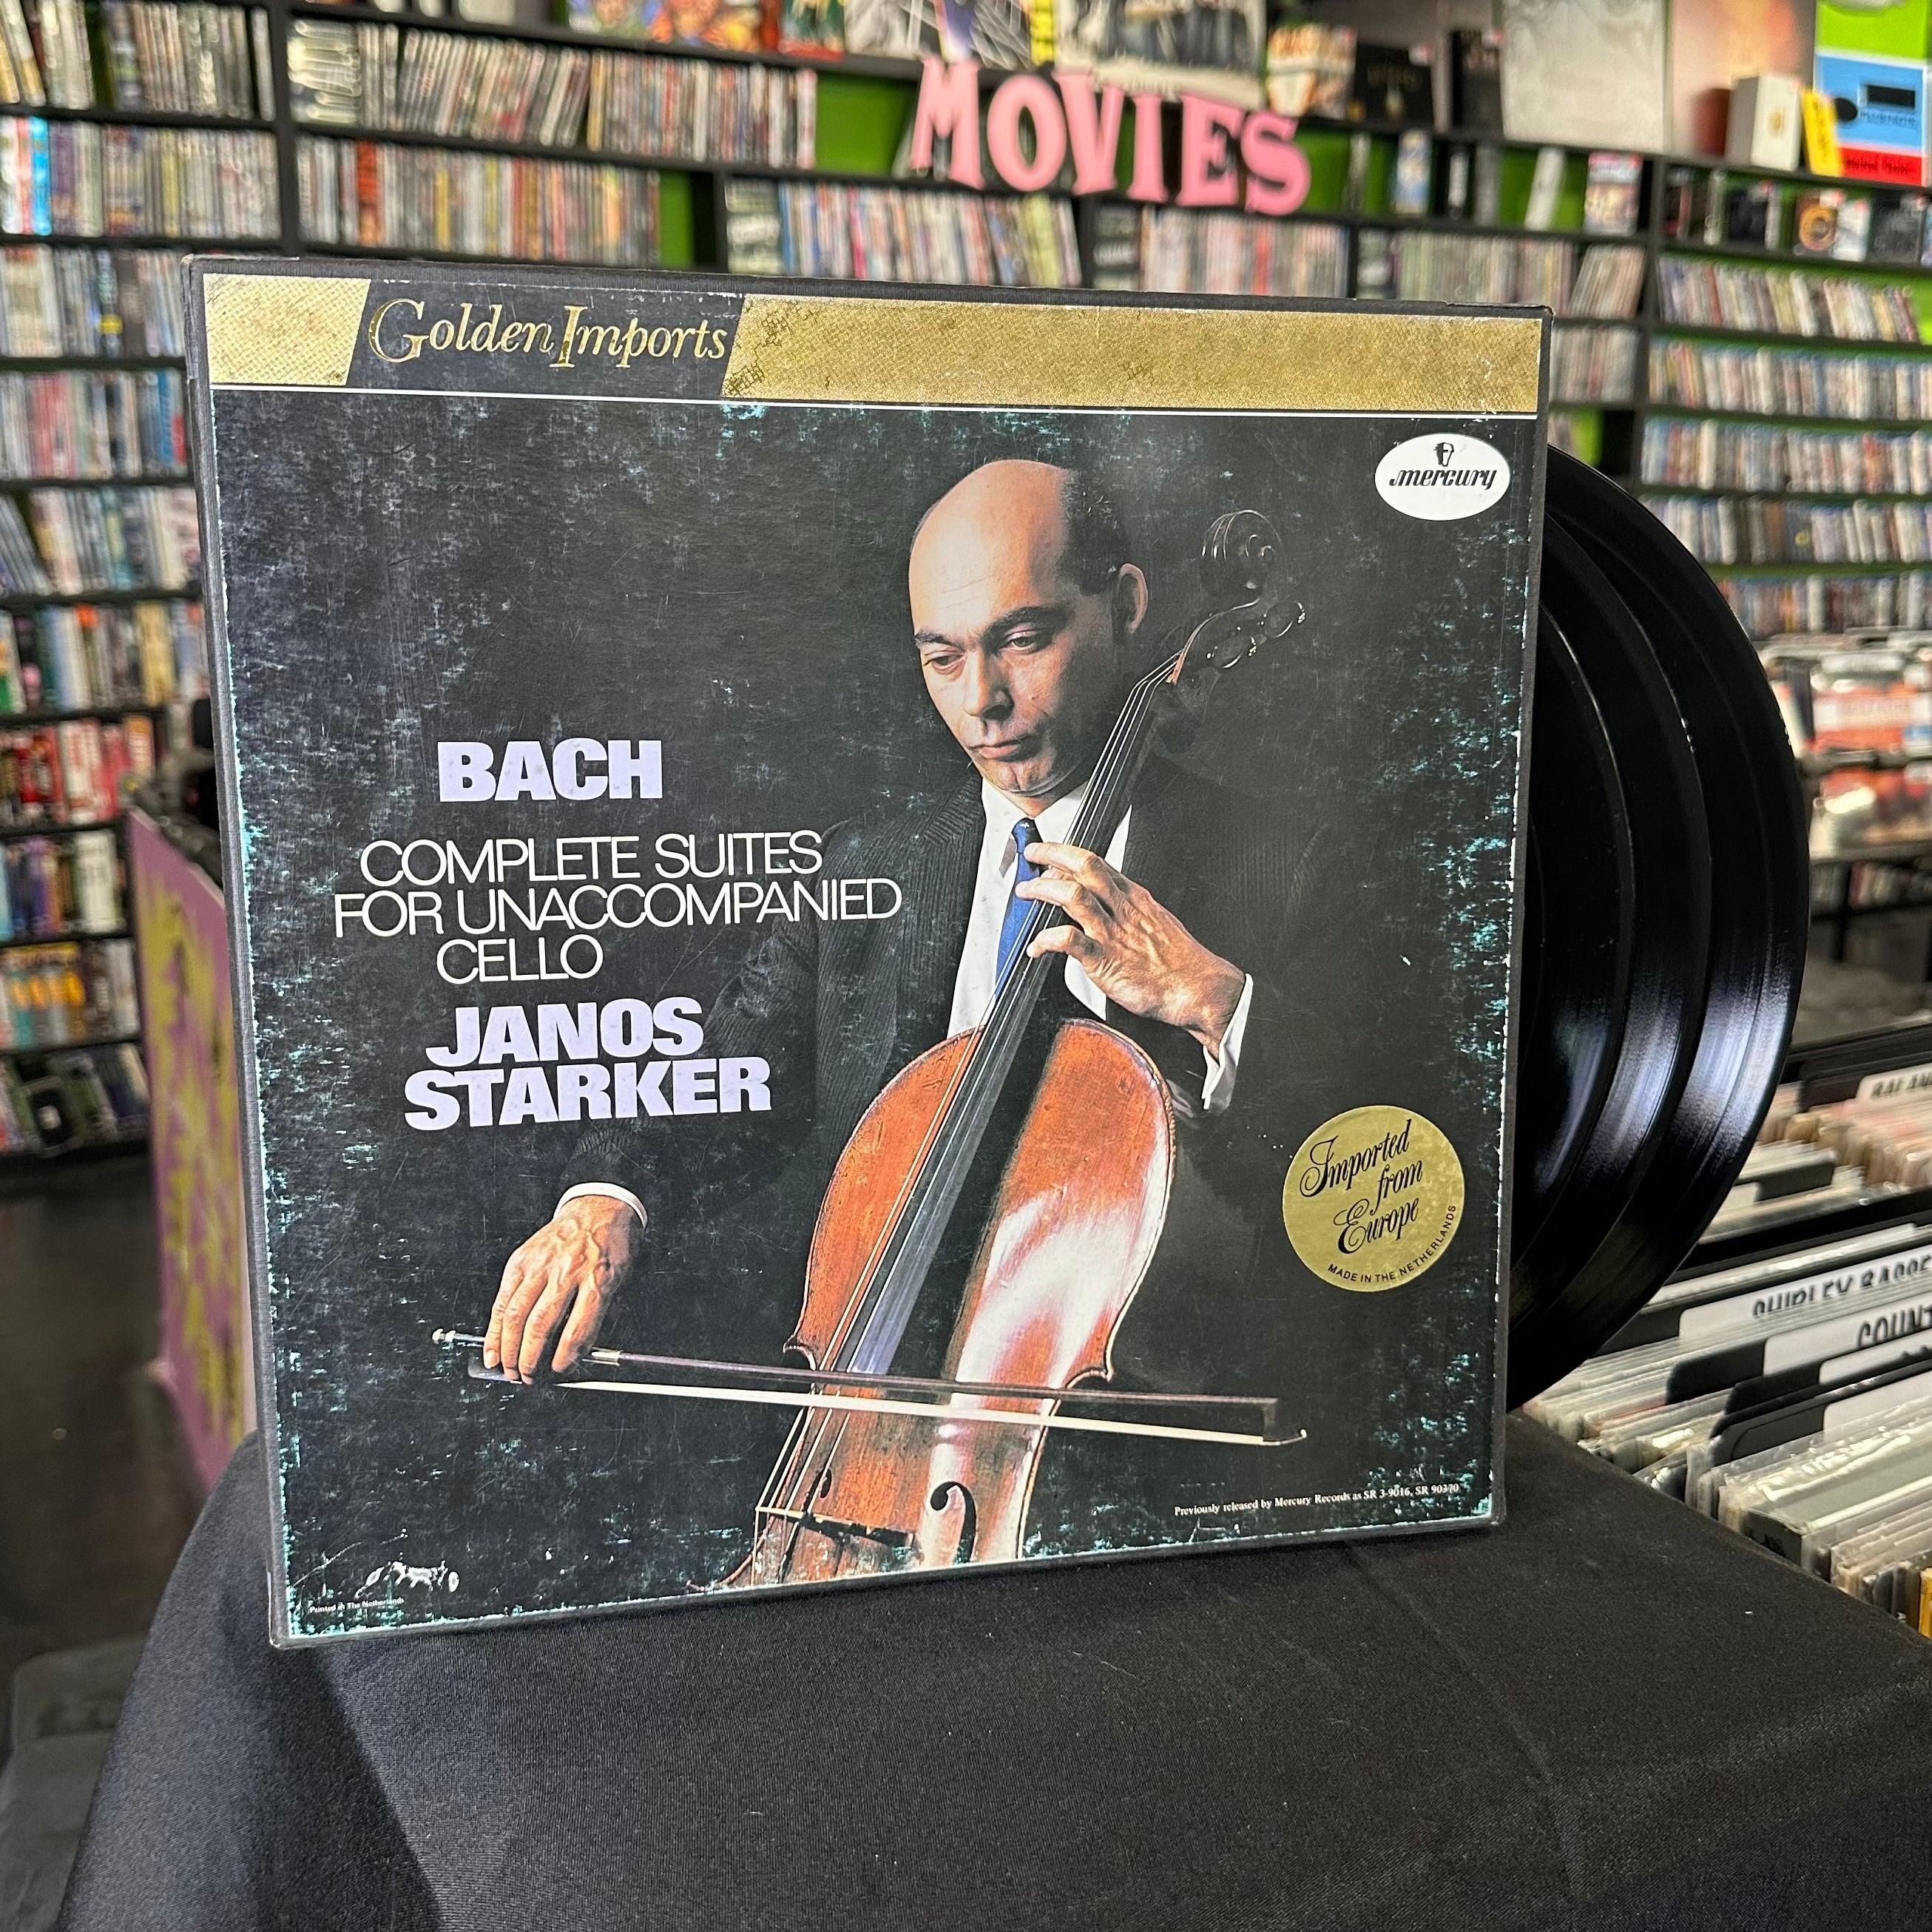 Bach- Complete Suites For Unaccompanied Cello (Janos Starker) - Darkside Records